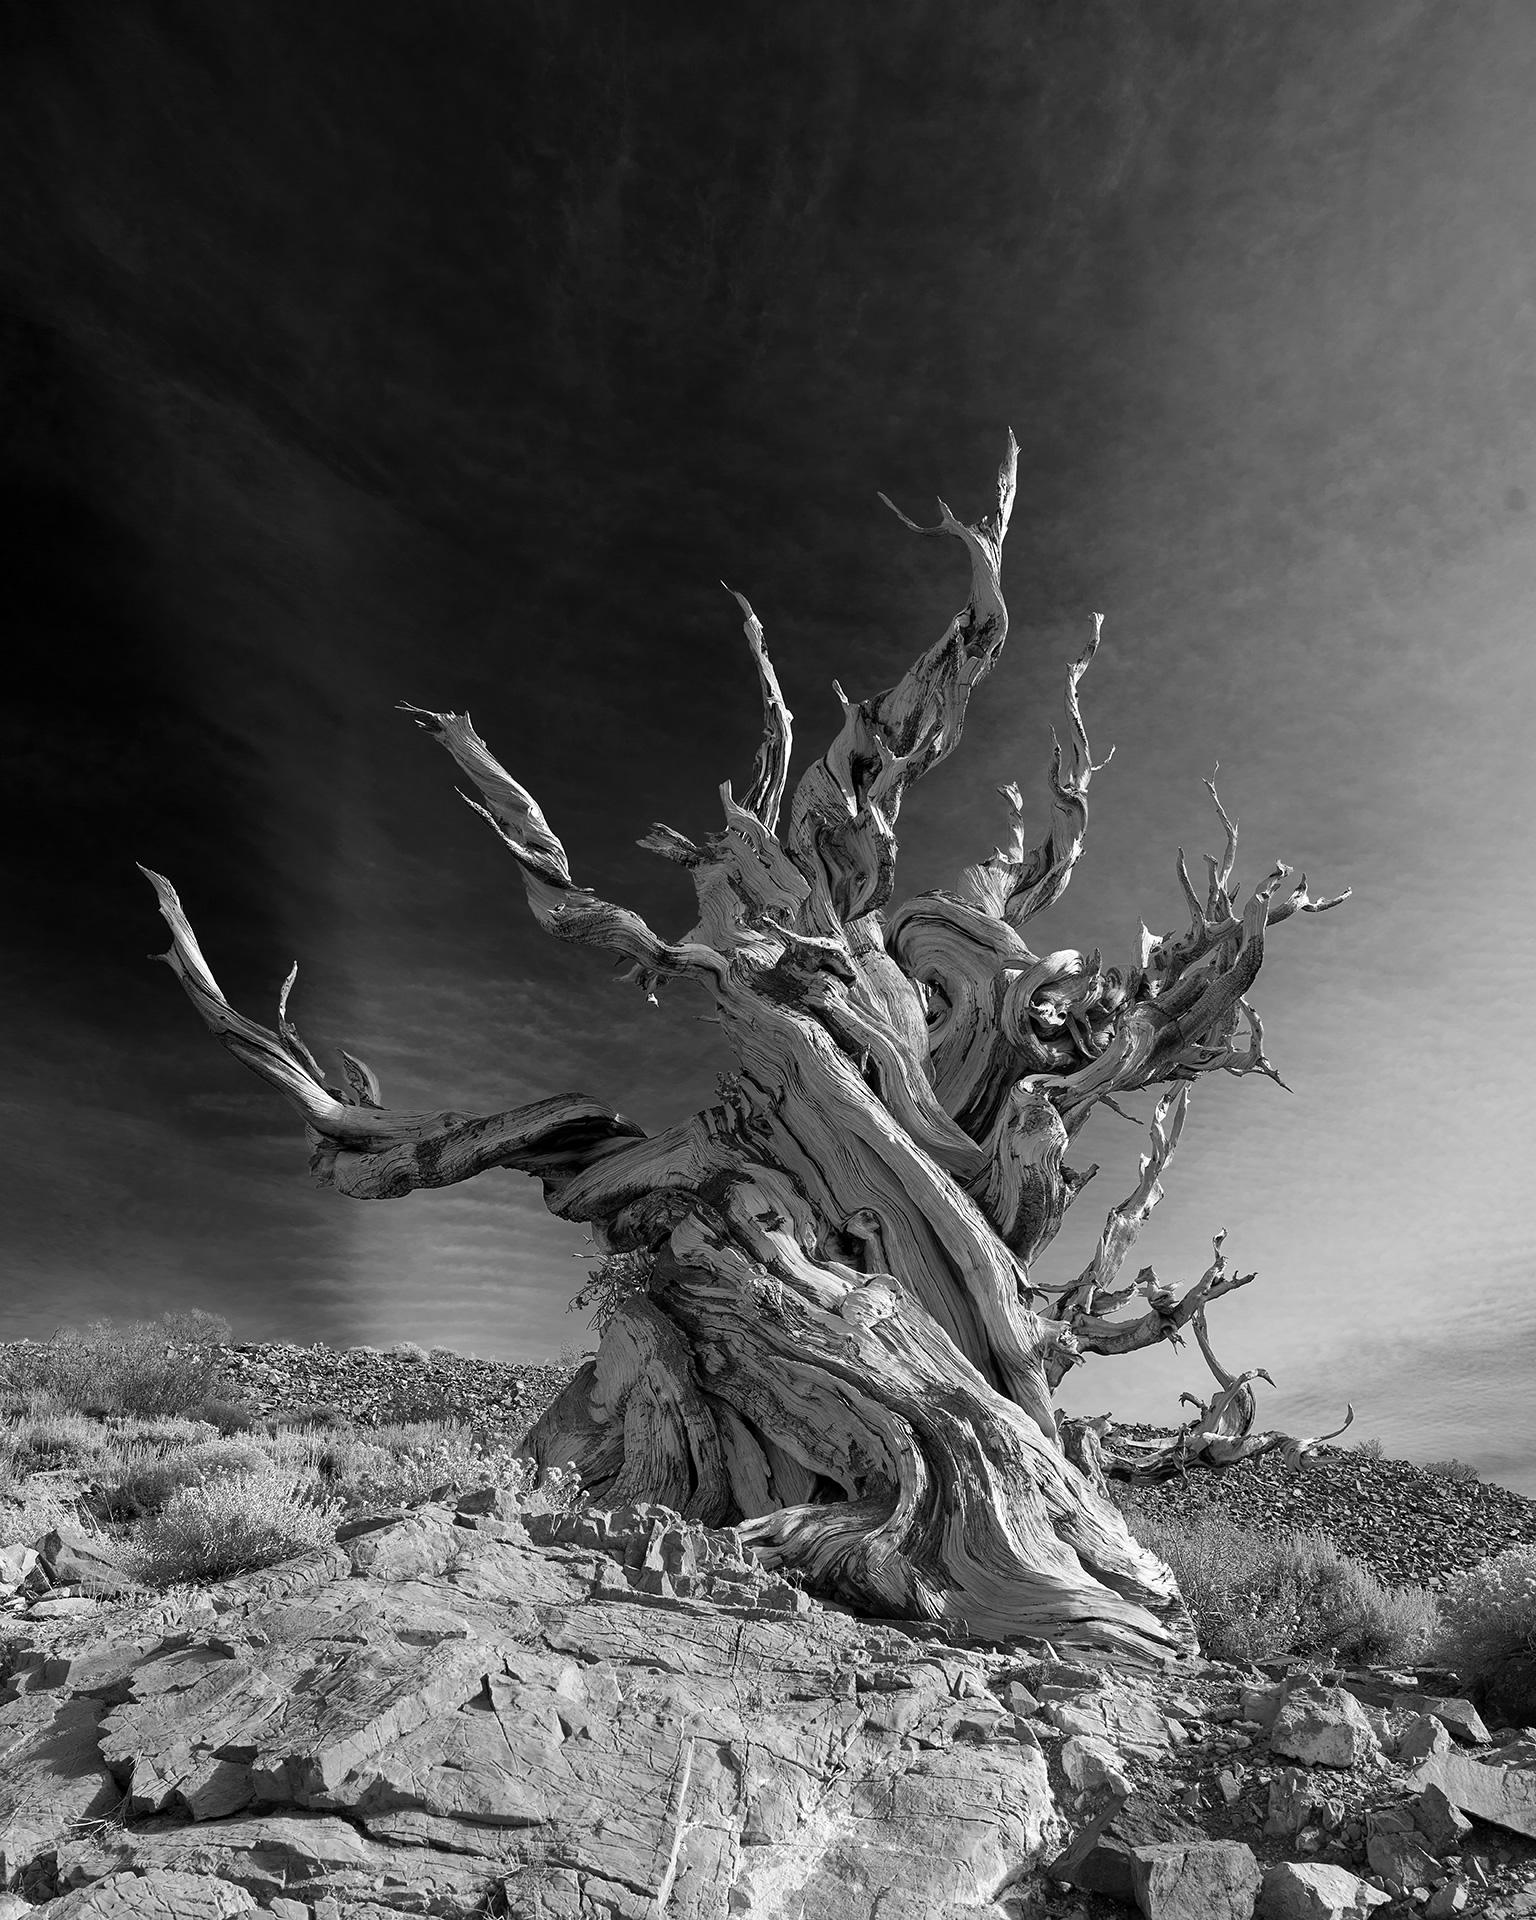 
Tree Study V by Frank Schott  
from a series of black and white photographs capturing the Golden State's vast mountain landscapes

40 x 32 inches / 102cm x 81cm
signed edition of 25

60 x 48 inches / 183cm x 152 
signed edition of 7 


archival